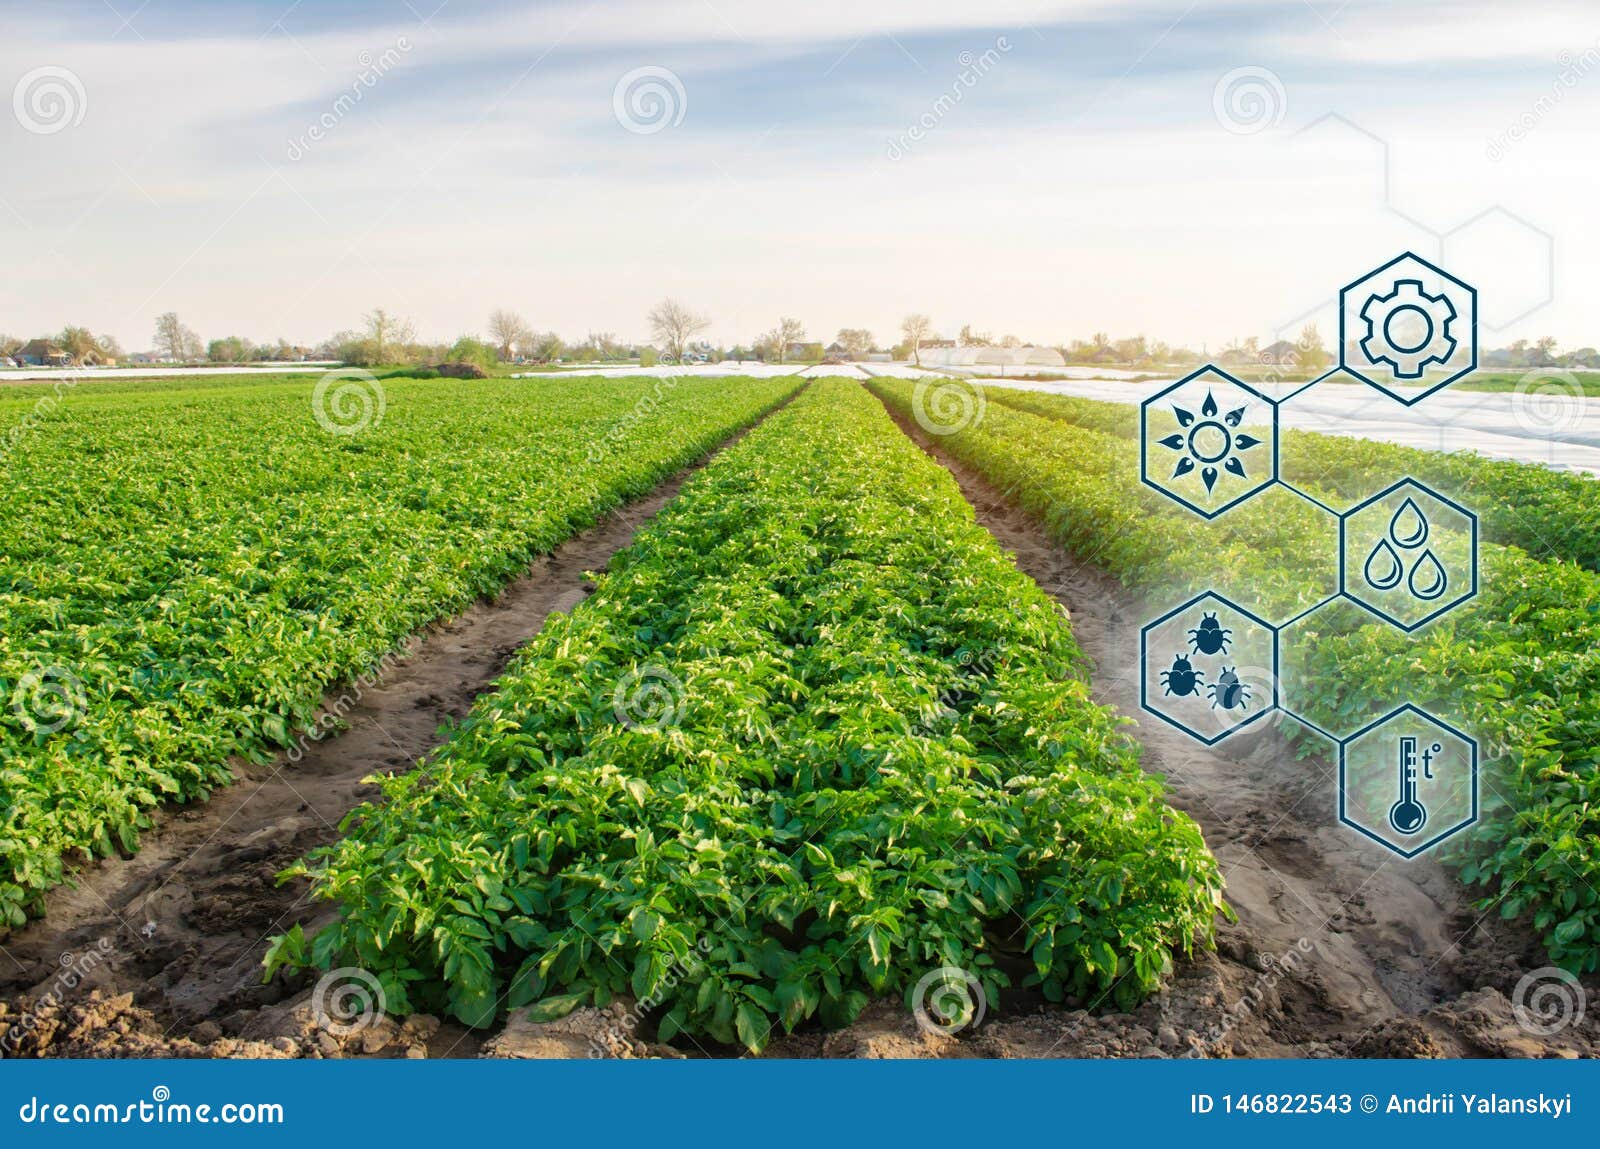 potato in the field. high technologies and innovations in agro-industry. study quality of soil and crop. scientific work and